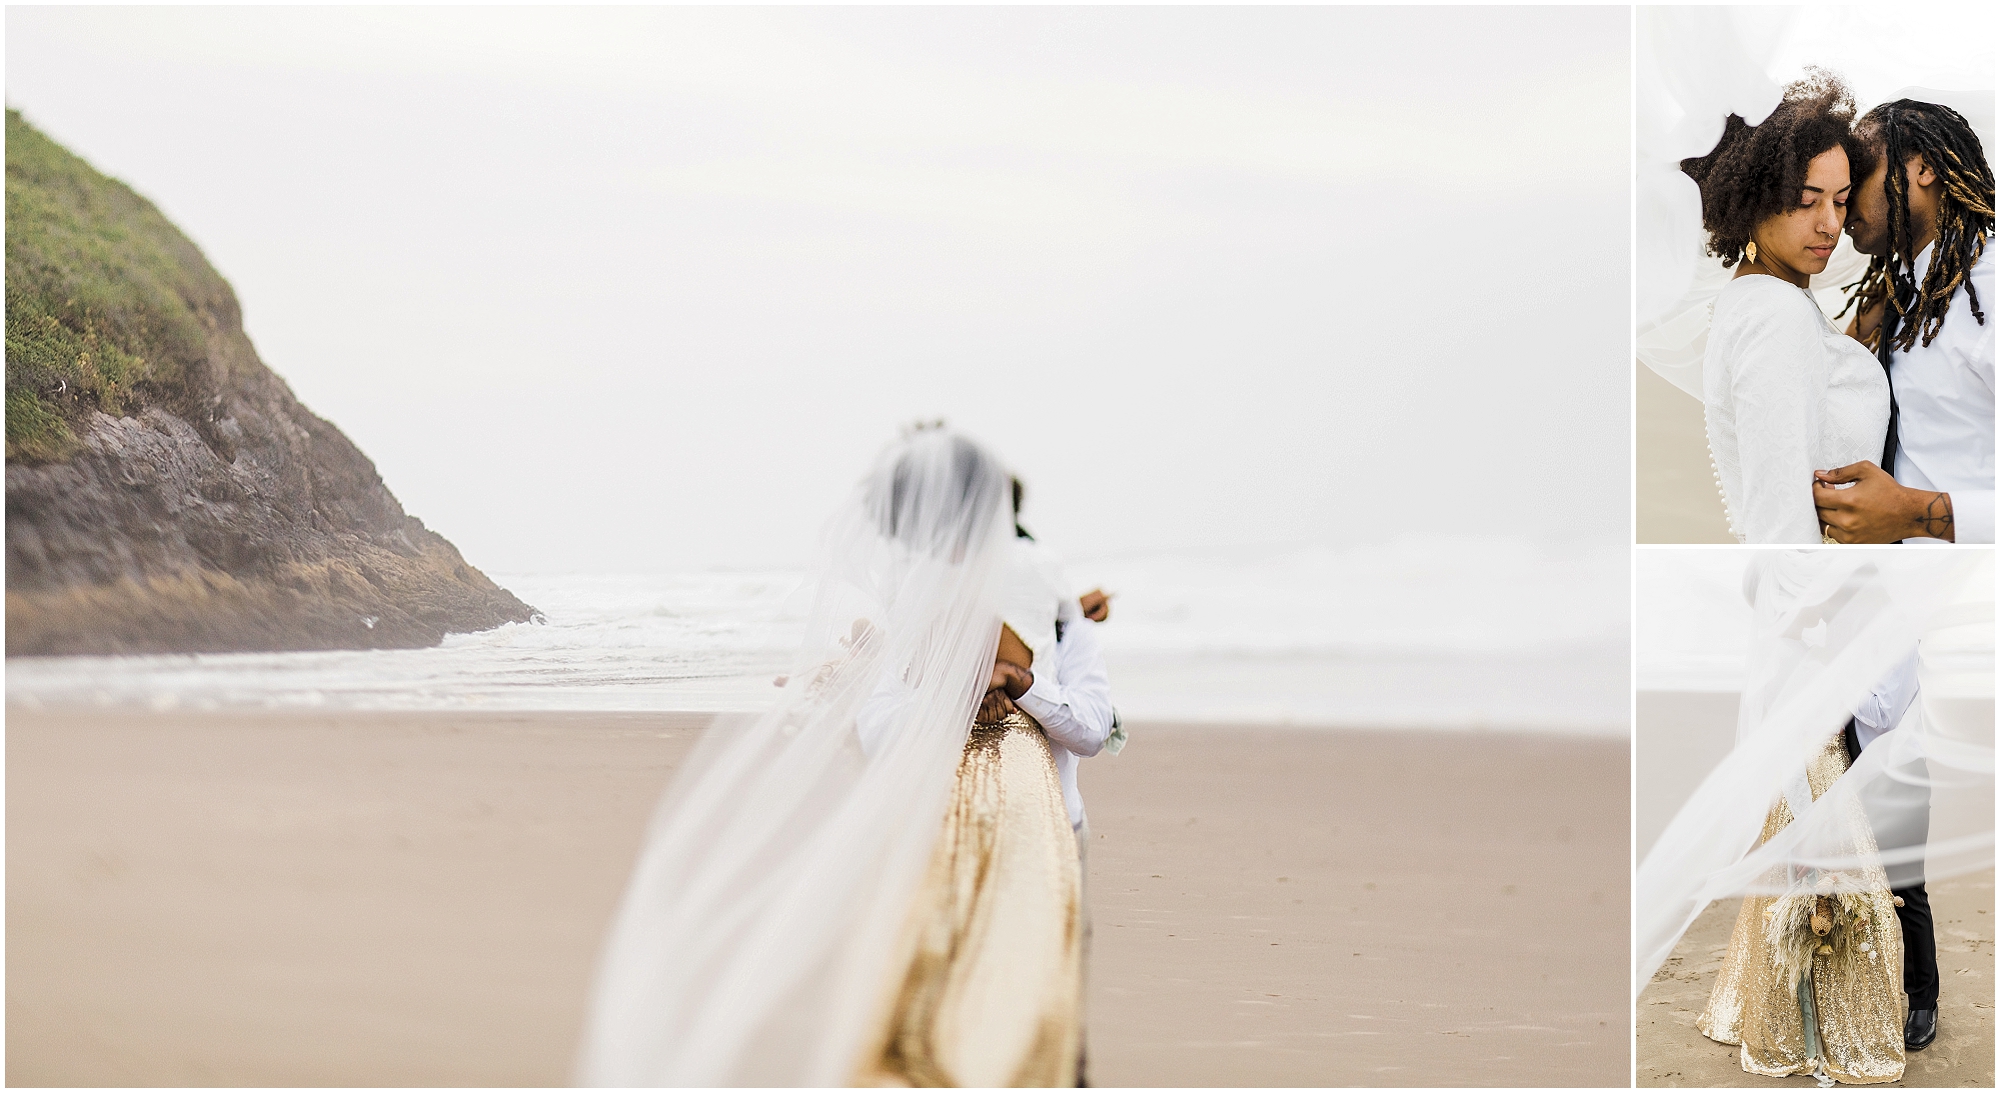 A BIPOC couple plays on the beach in the bride's long white veil during their Oregon Coast elopement. | Erica Swantek Photography